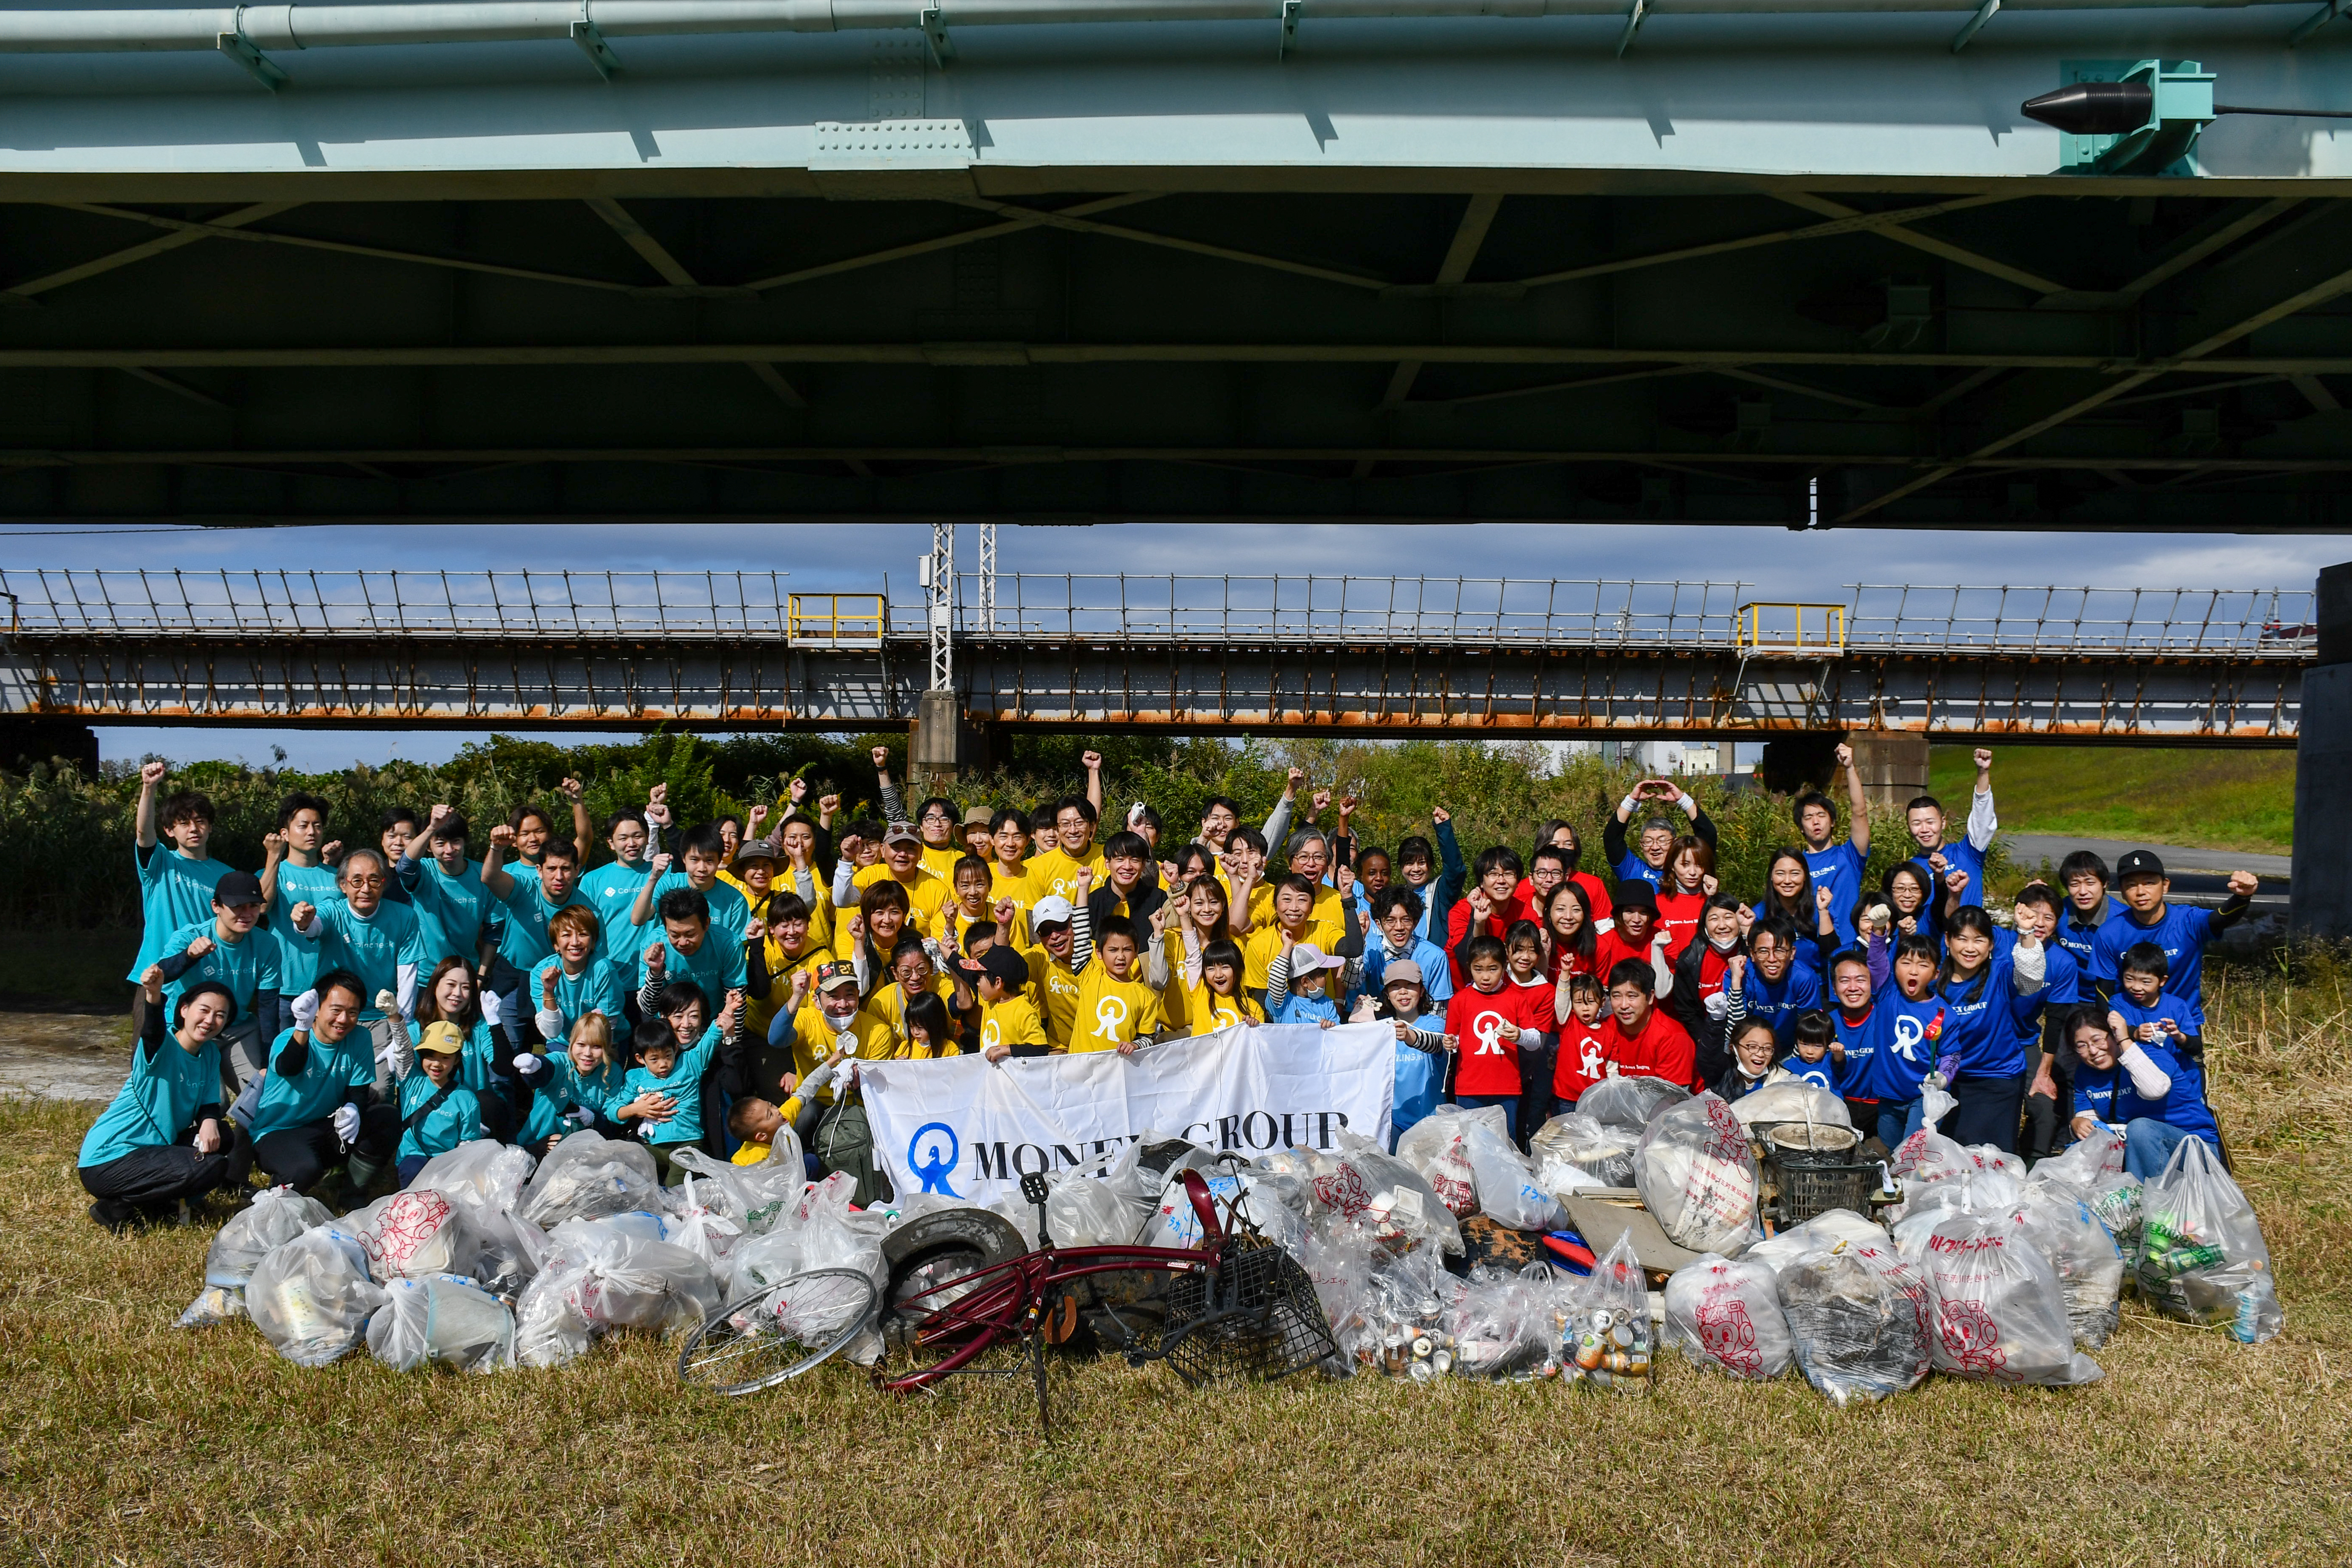 Group photo of employees and their families who participated in the volunteer activities.